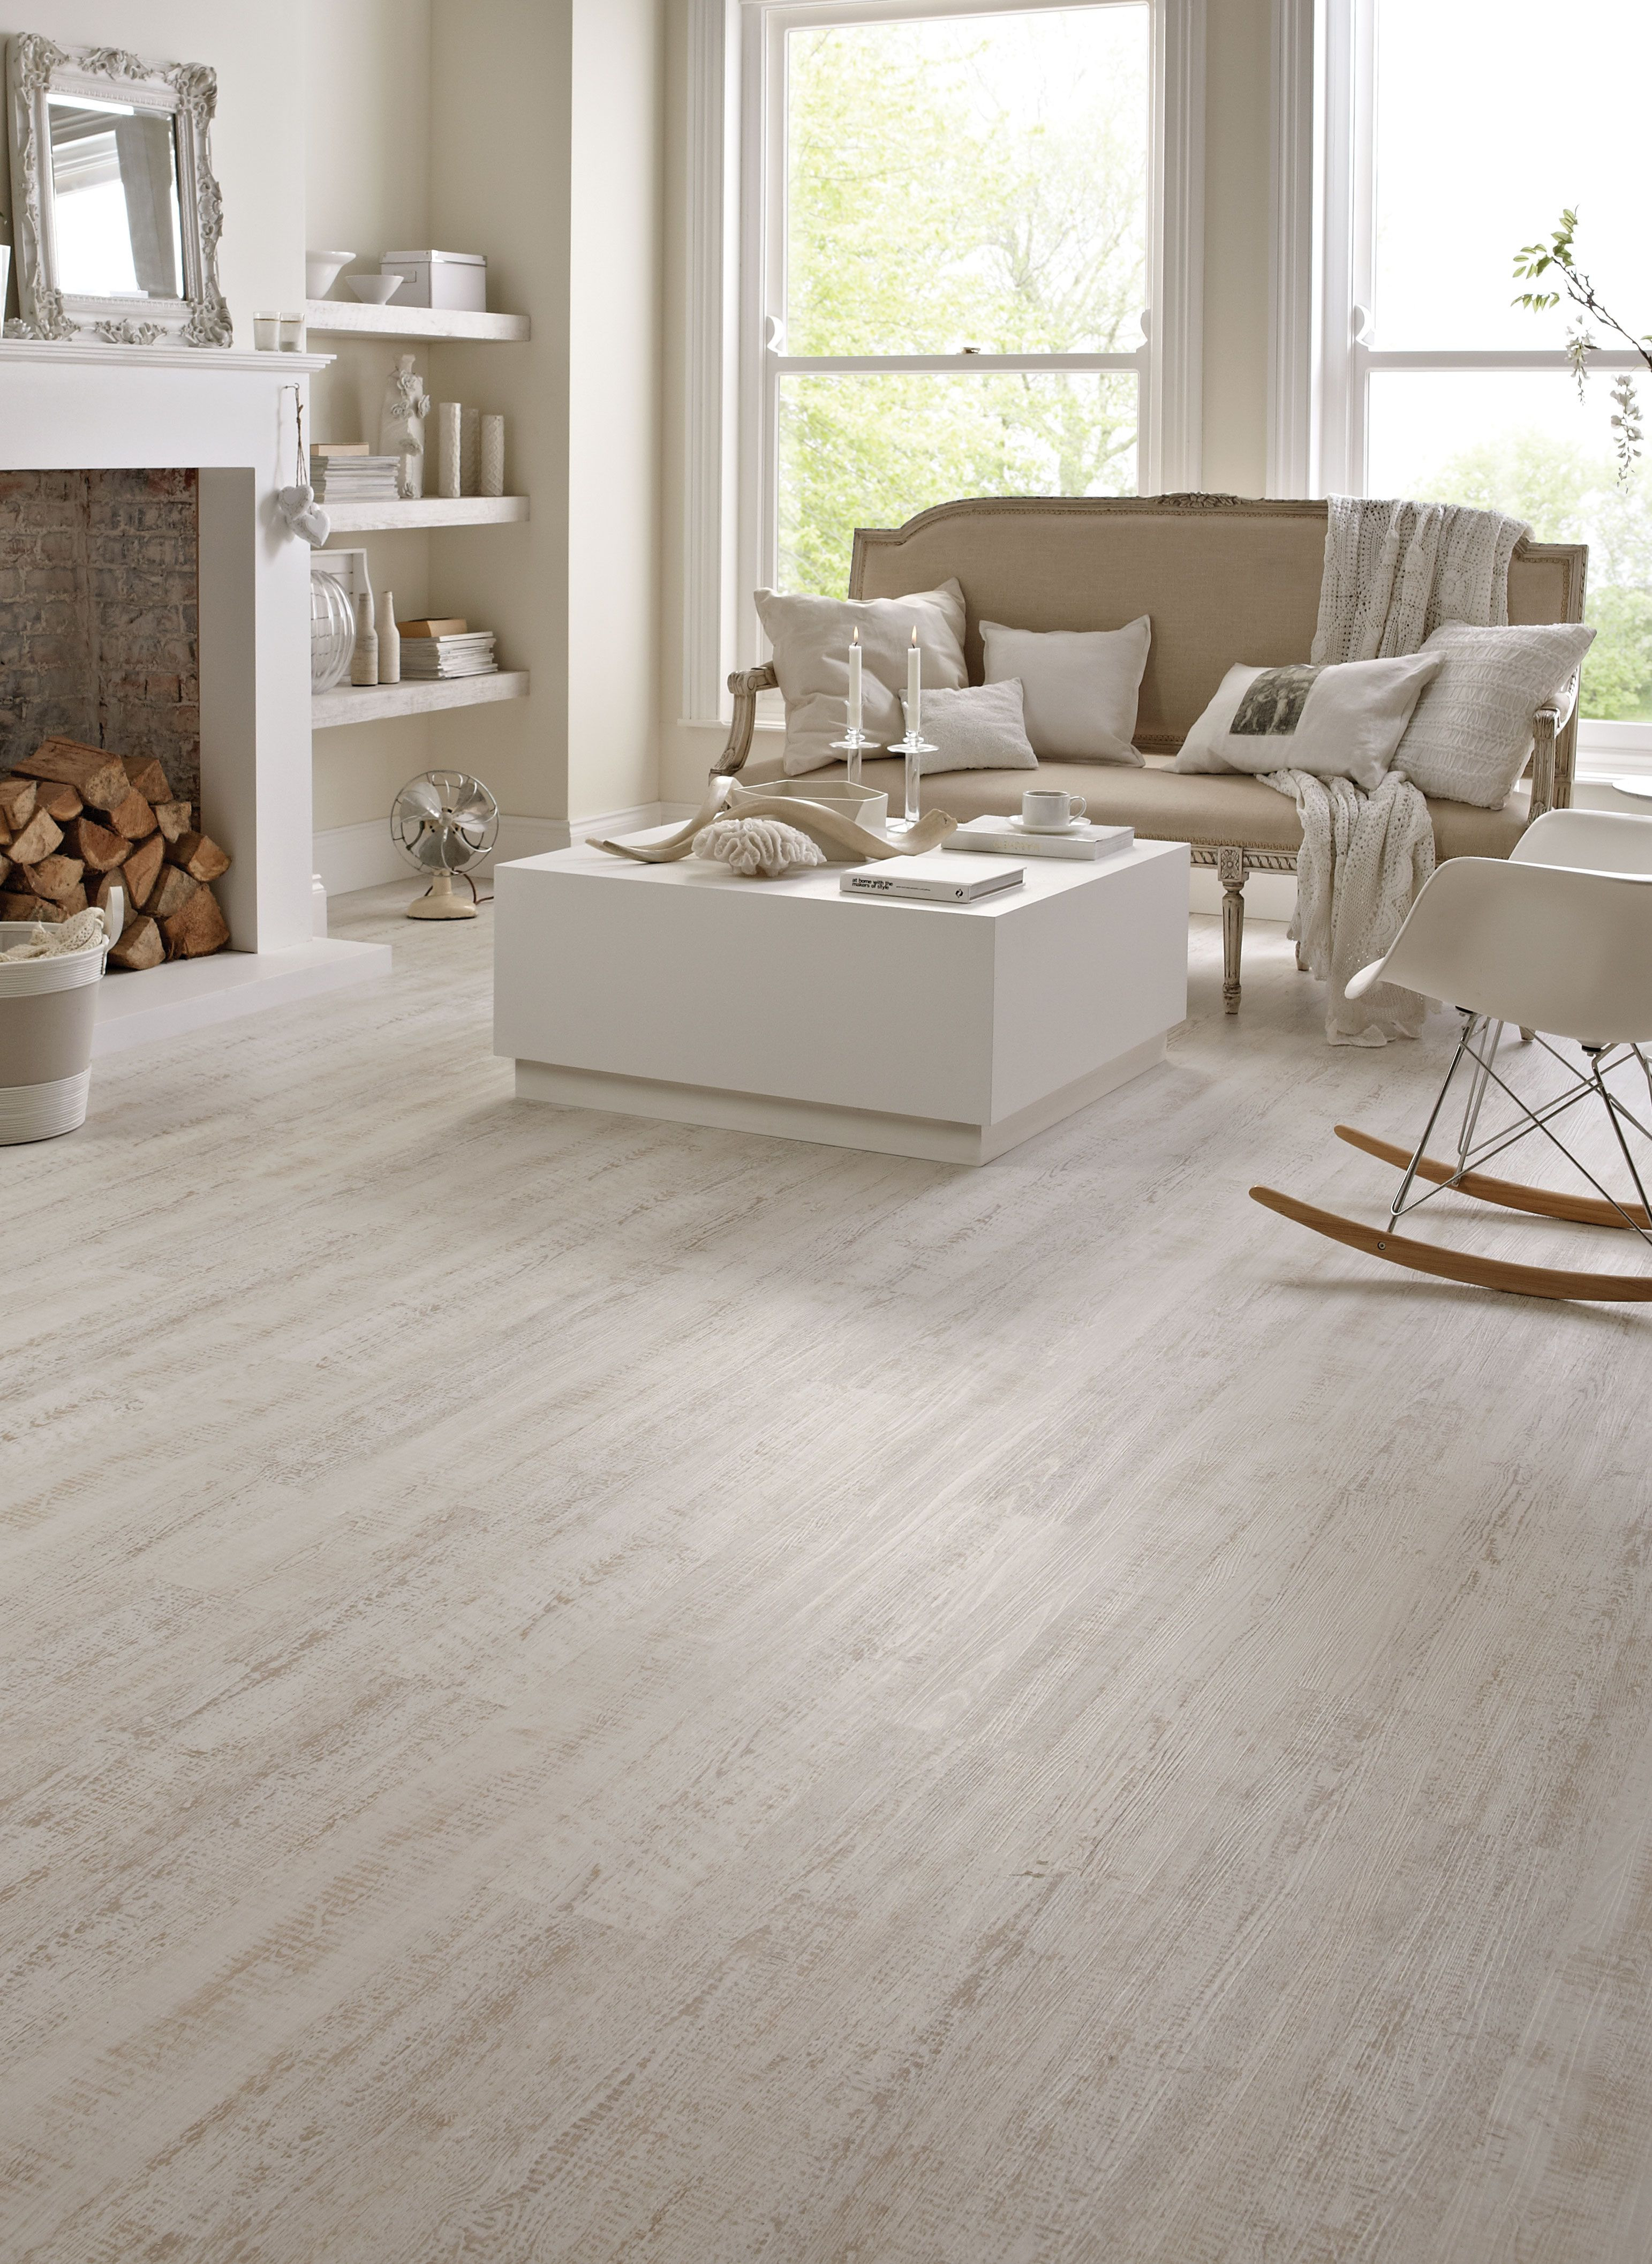 17 Fashionable Hardwood Floor Refinishing In Delaware County Pa 2024 free download hardwood floor refinishing in delaware county pa of karndean wood flooring white painted oak by karndeanfloors in karndean wood flooring white painted oak by karndeanfloors available from ro